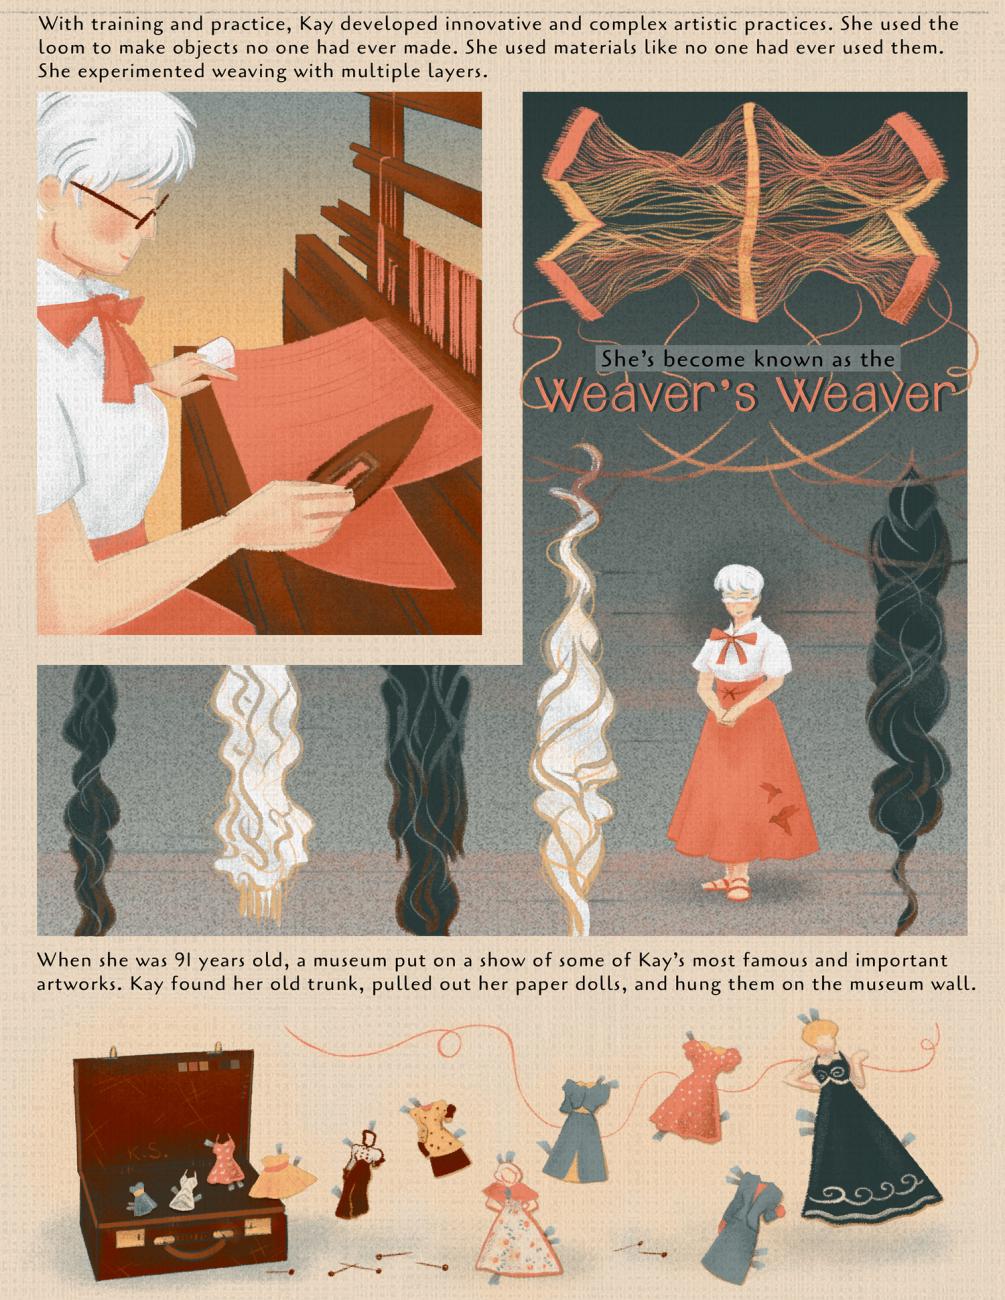 The Weaver’s Weaver: A Comic About Kay Sekimachi, page three